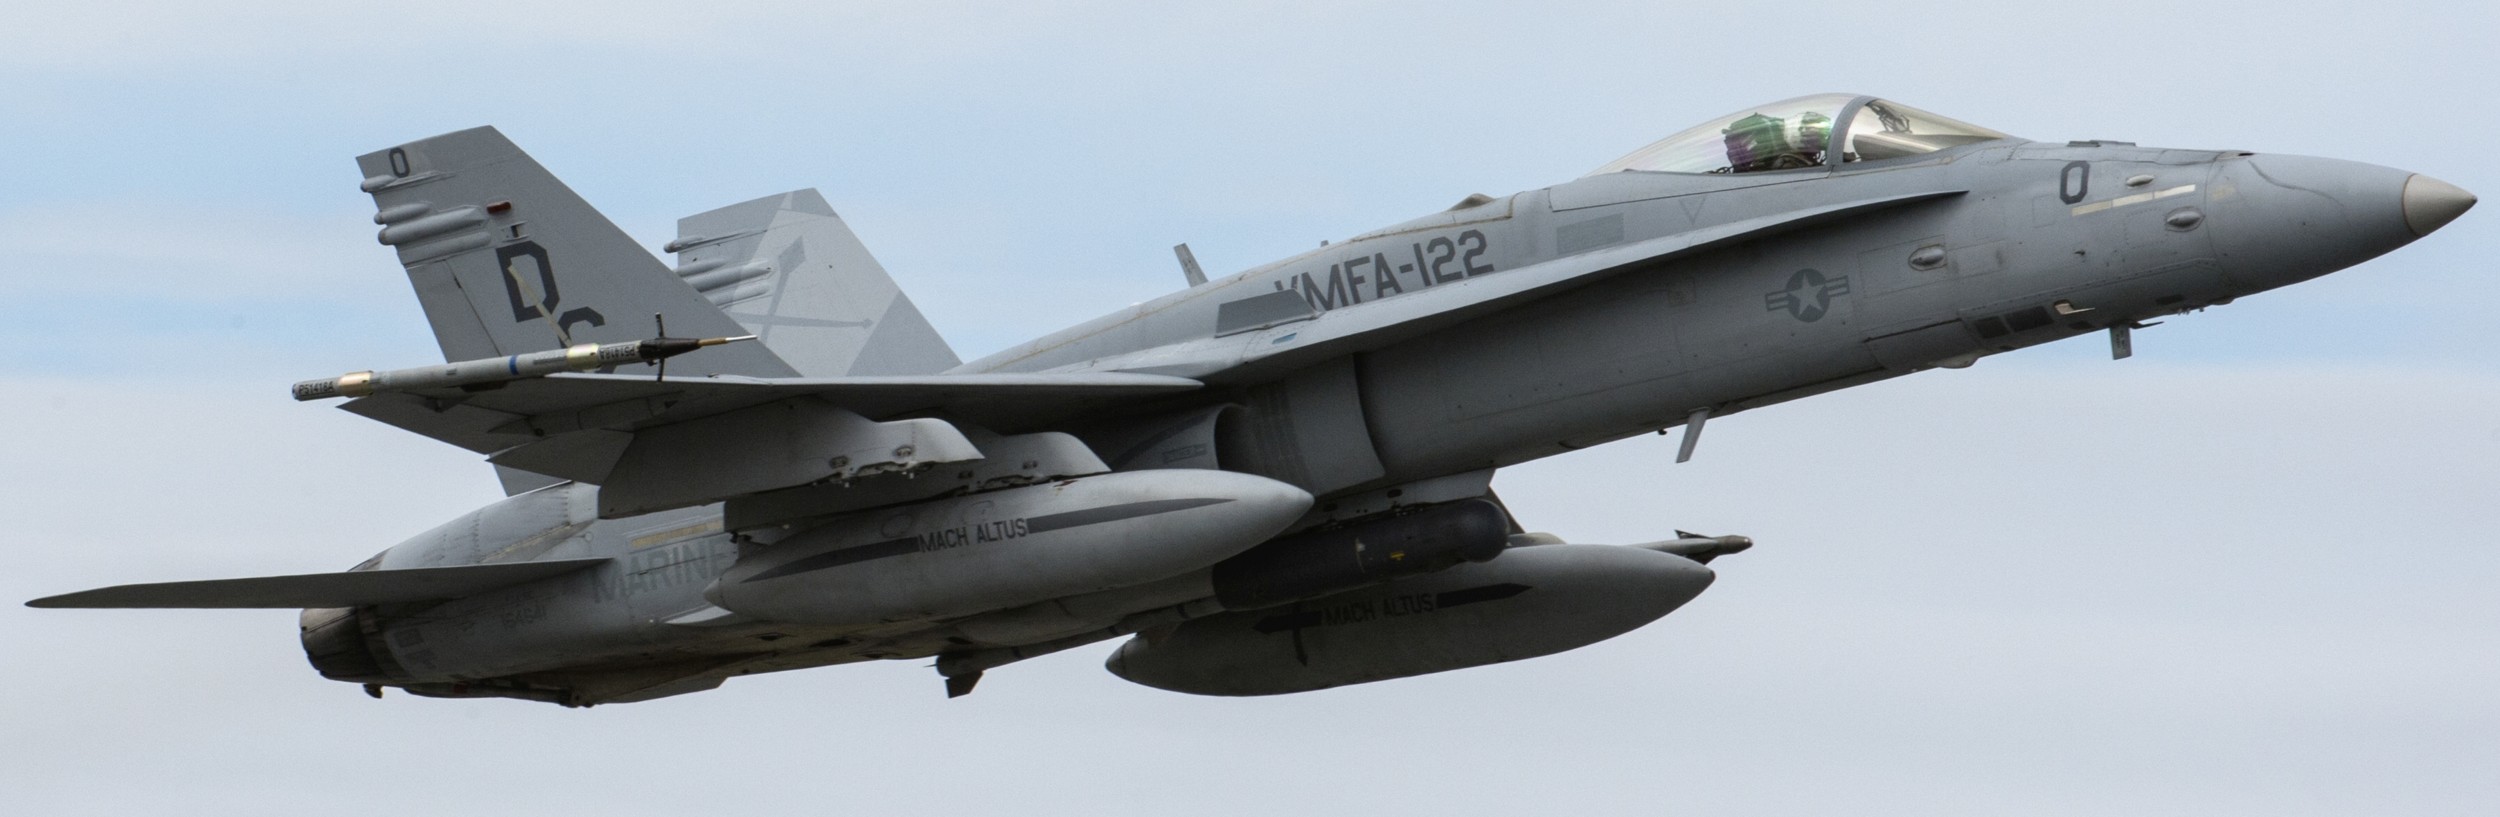 vmfa-122 flying leathernecks f/a-18c hornet marine fighter attack squadron 83